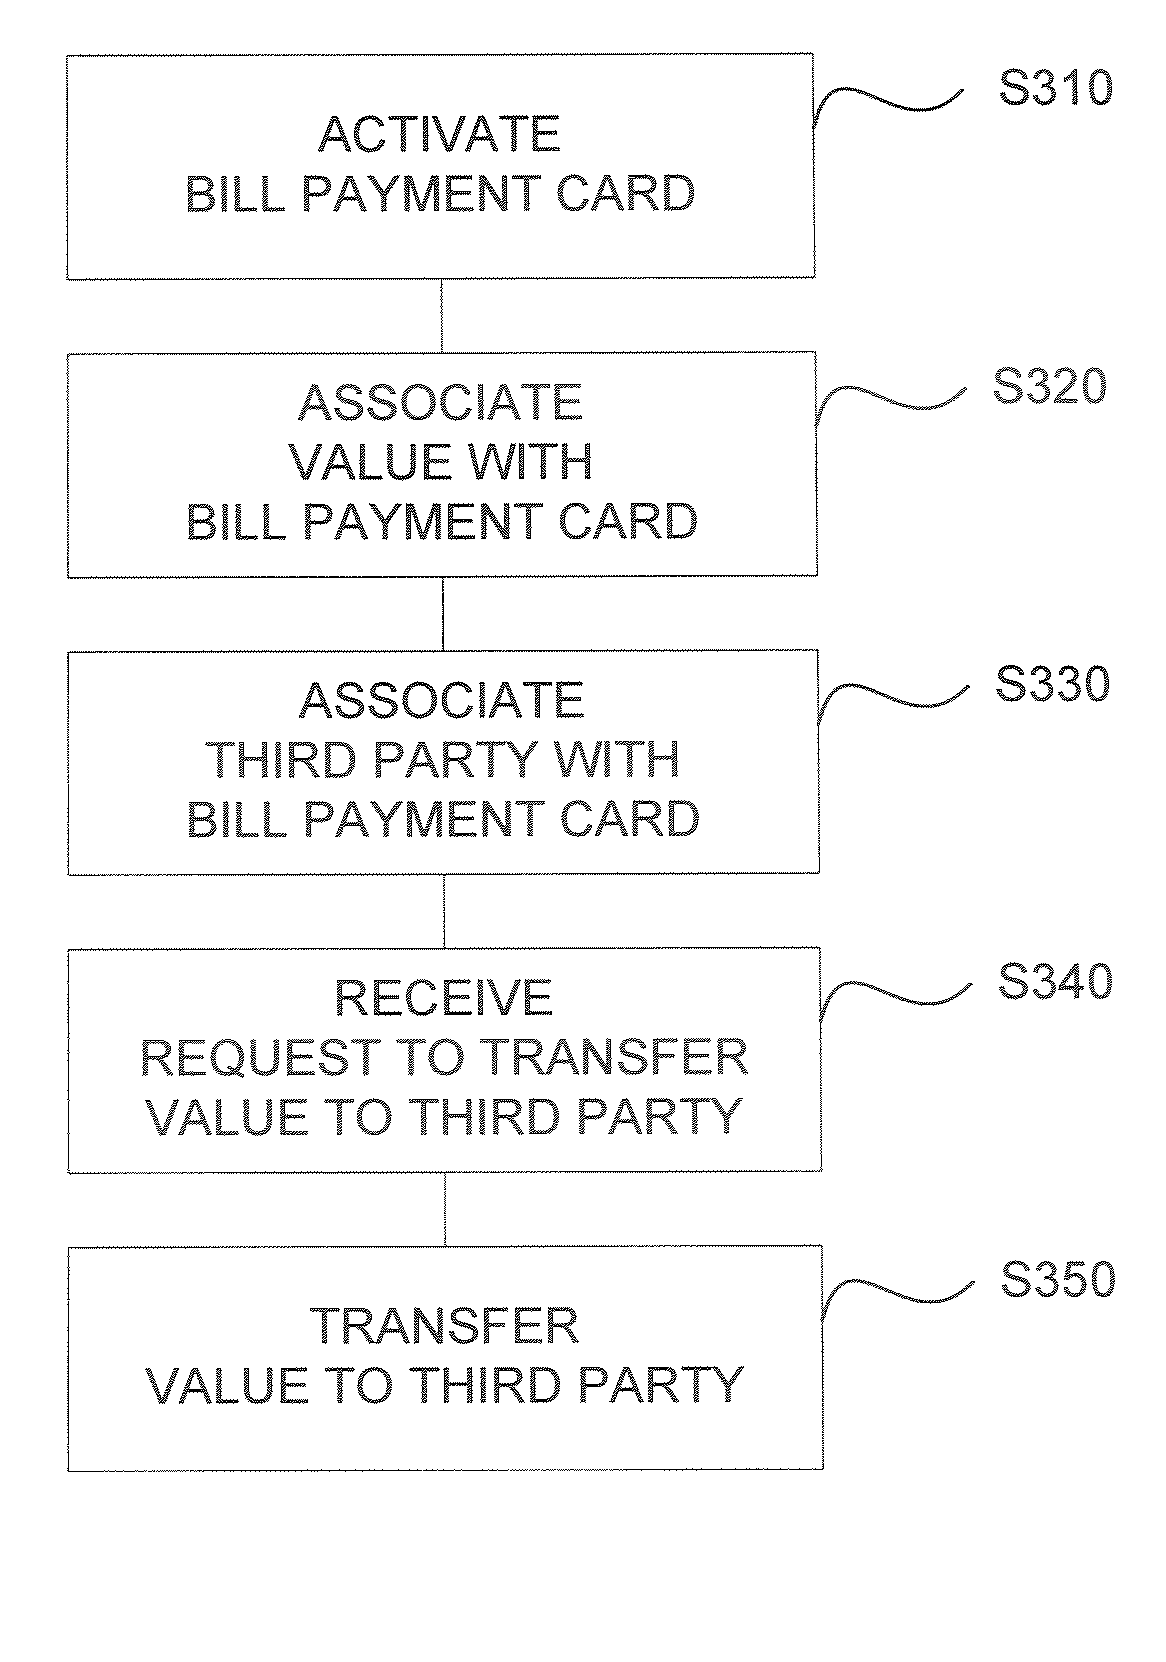 Bill Payment Card Method and System